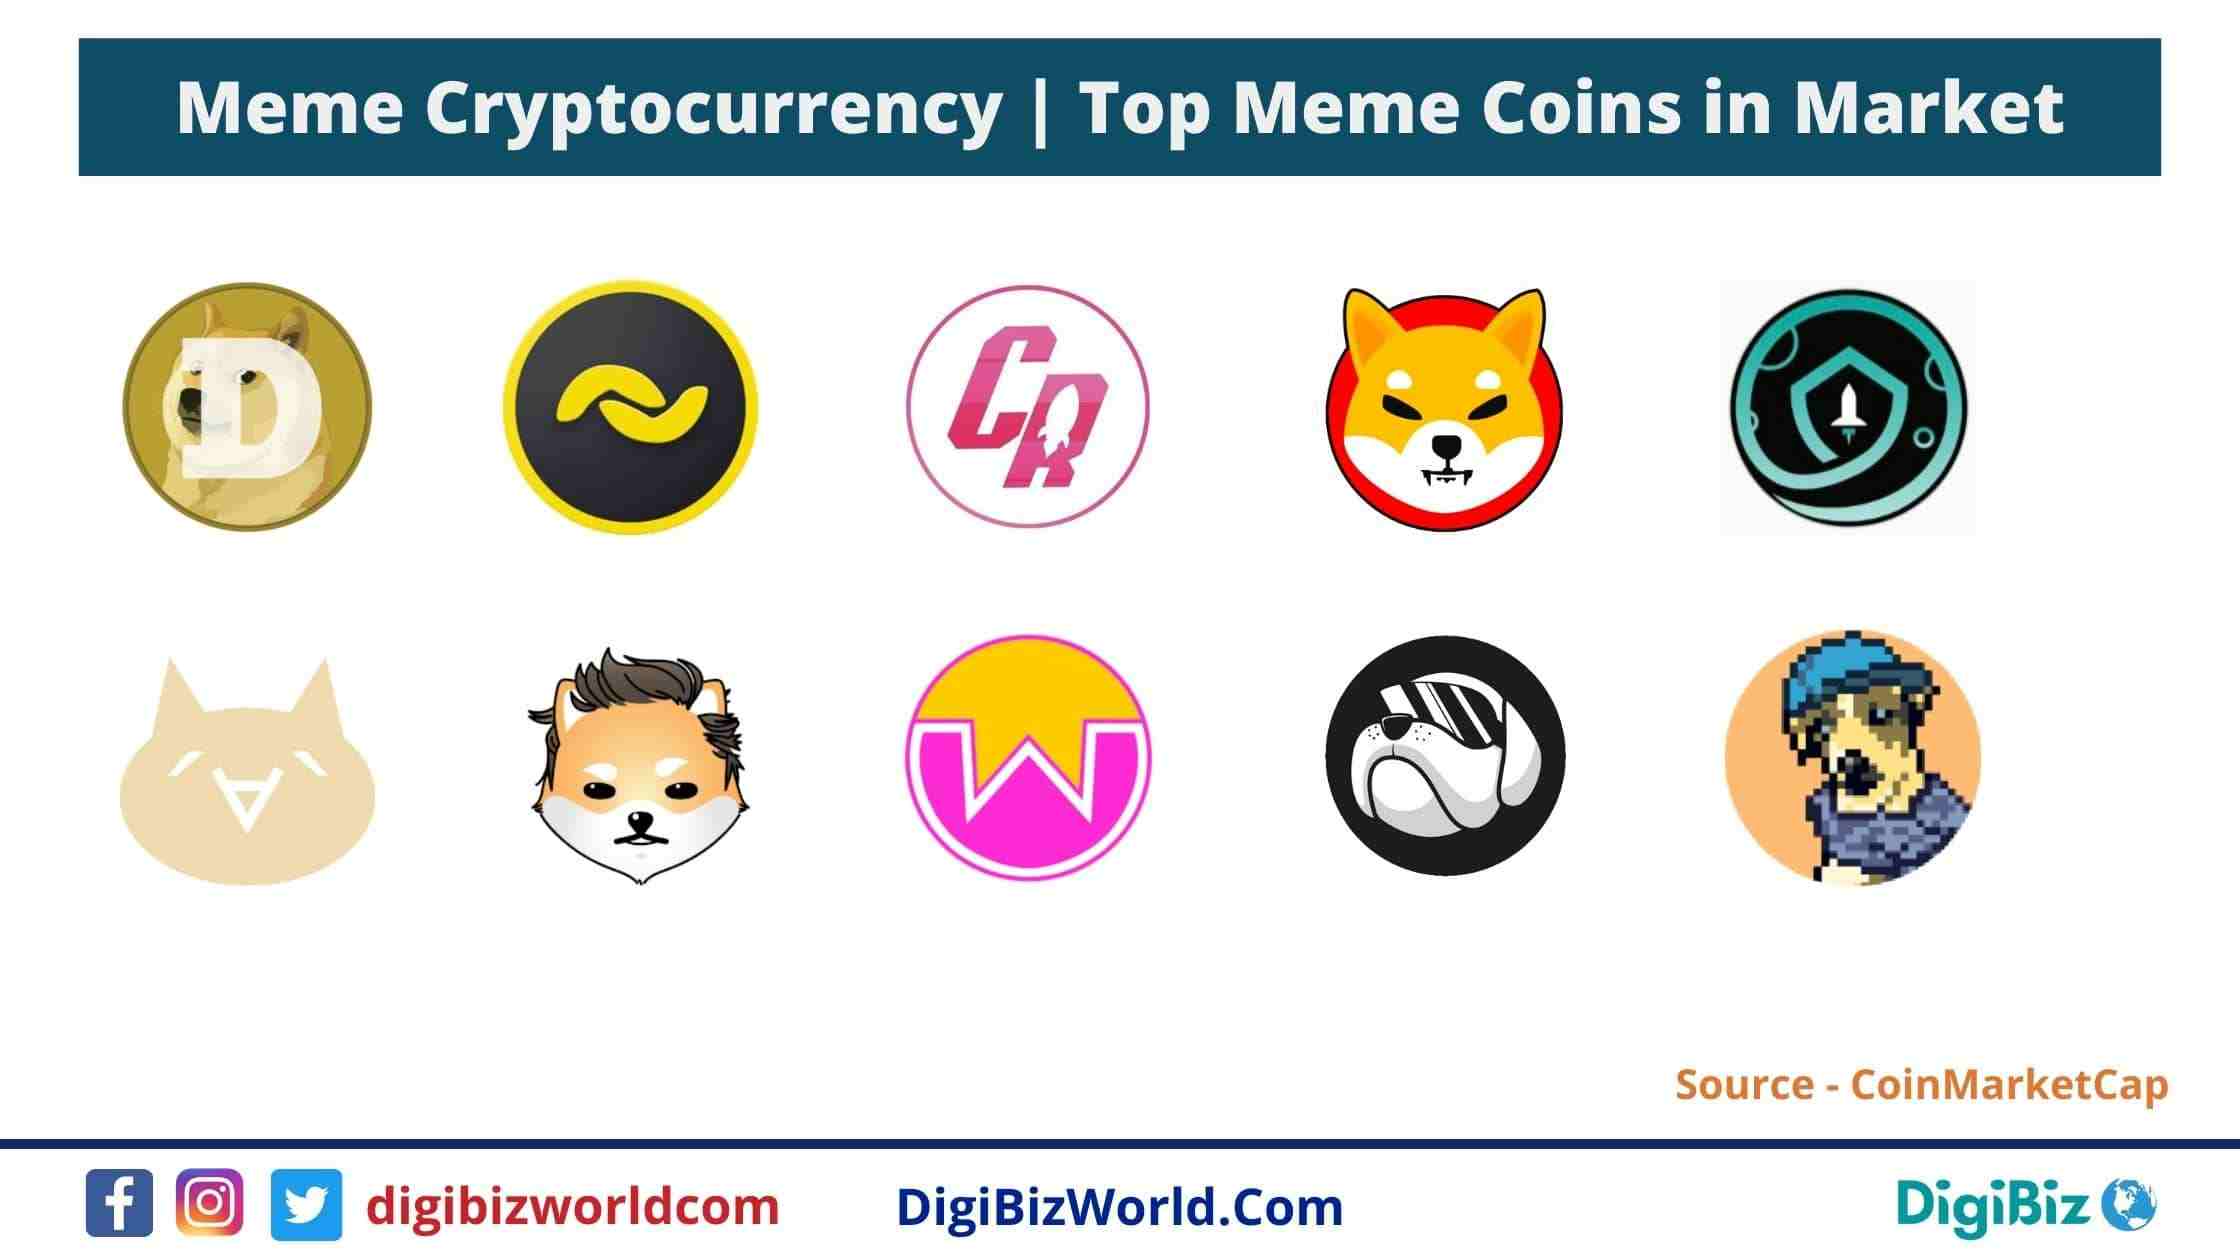 Meme Cryptocurrency | Best Meme Coins and Tokens by Market ...